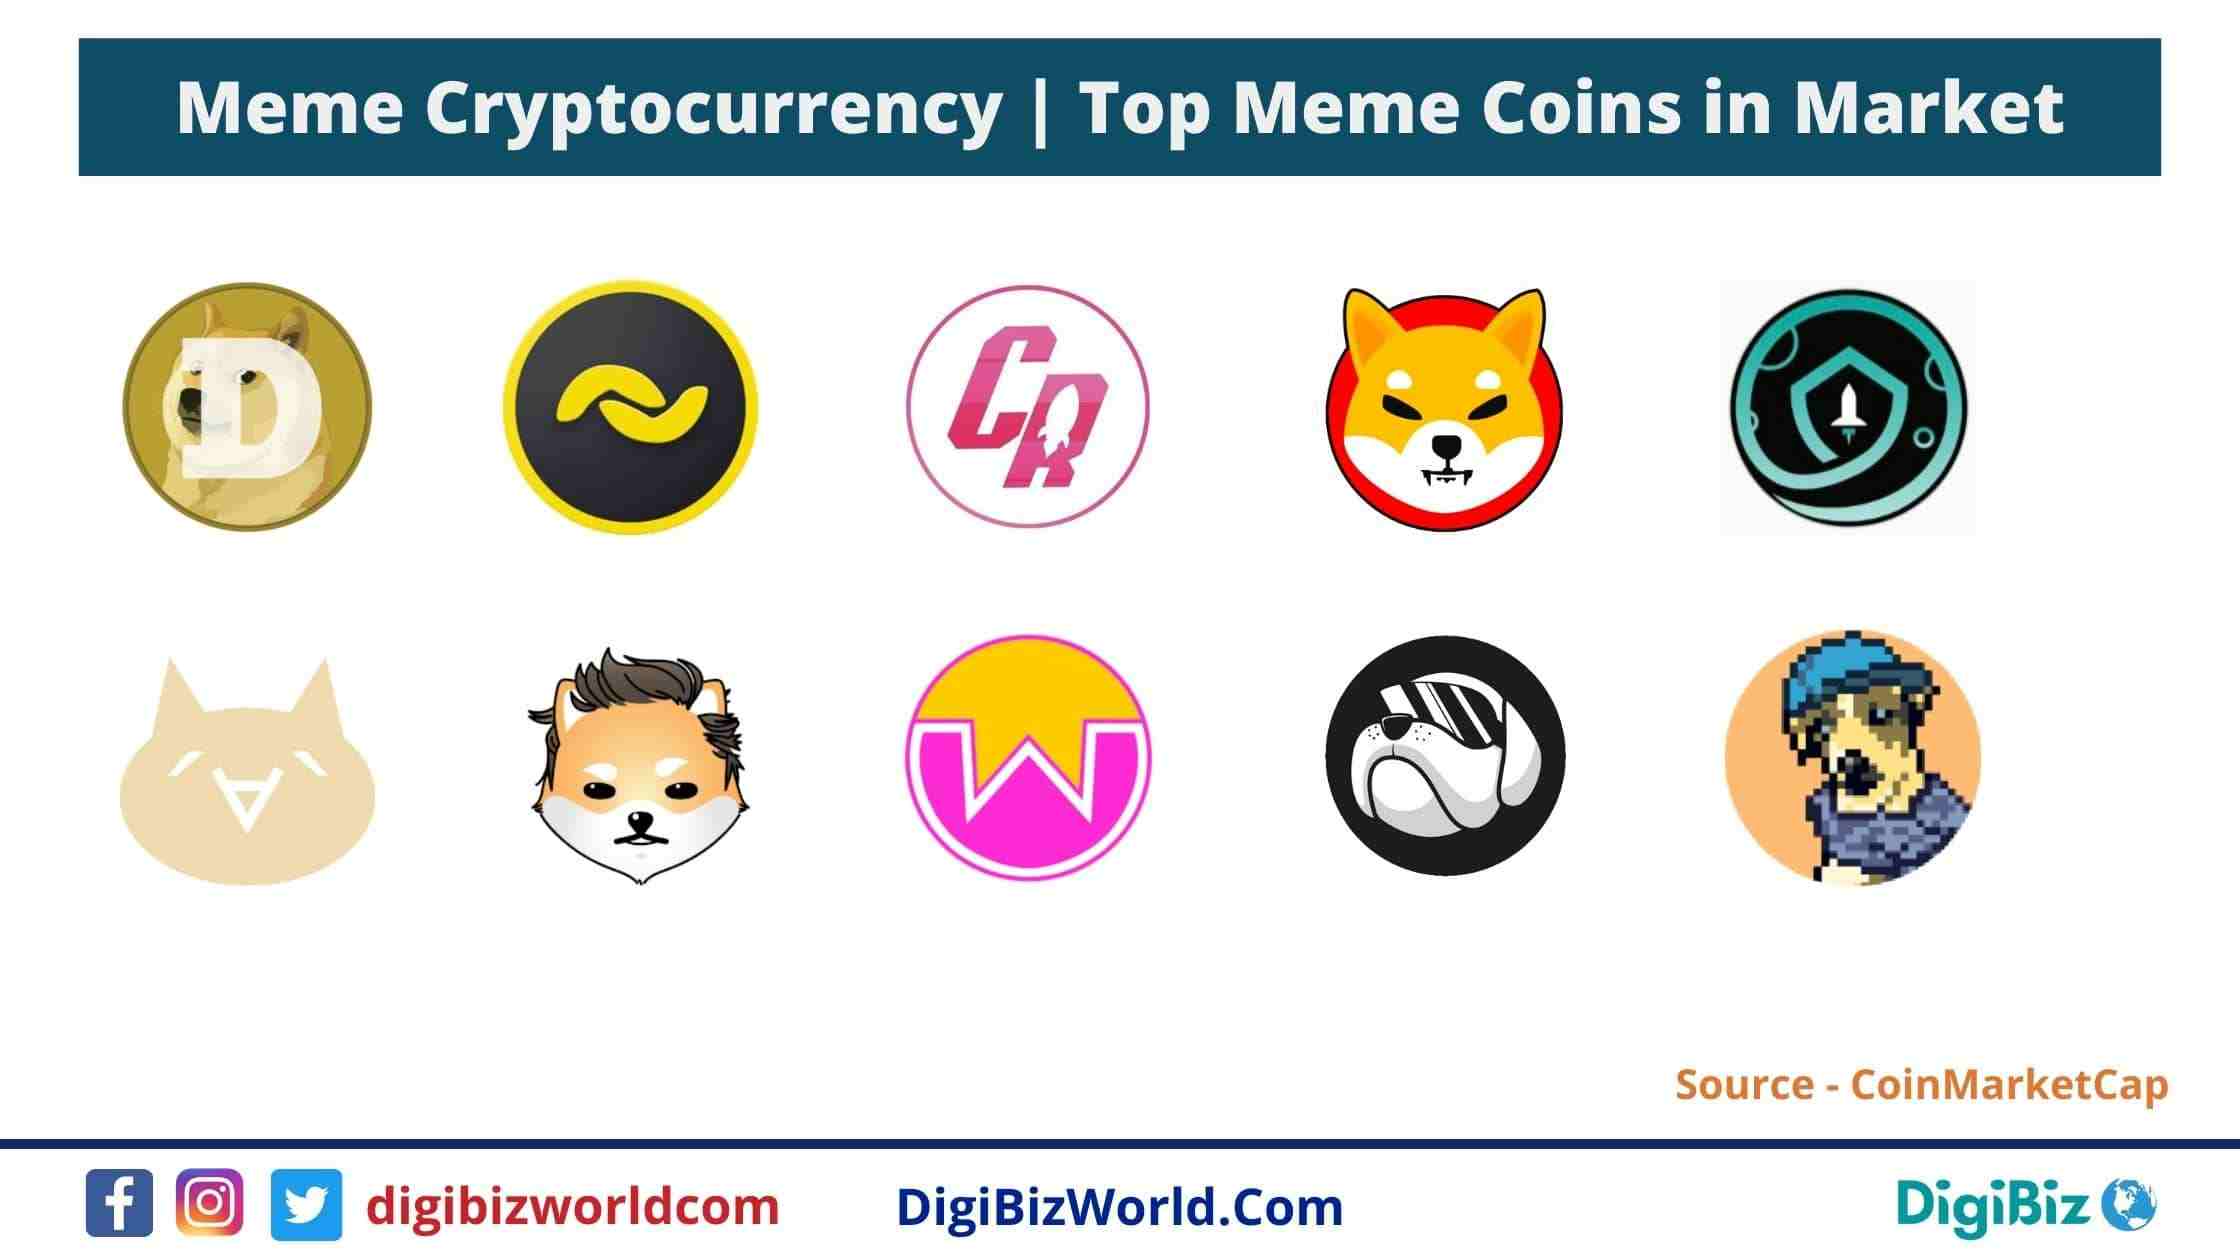 Meme Cryptocurrency | Best Meme Coins and Tokens by Market ...